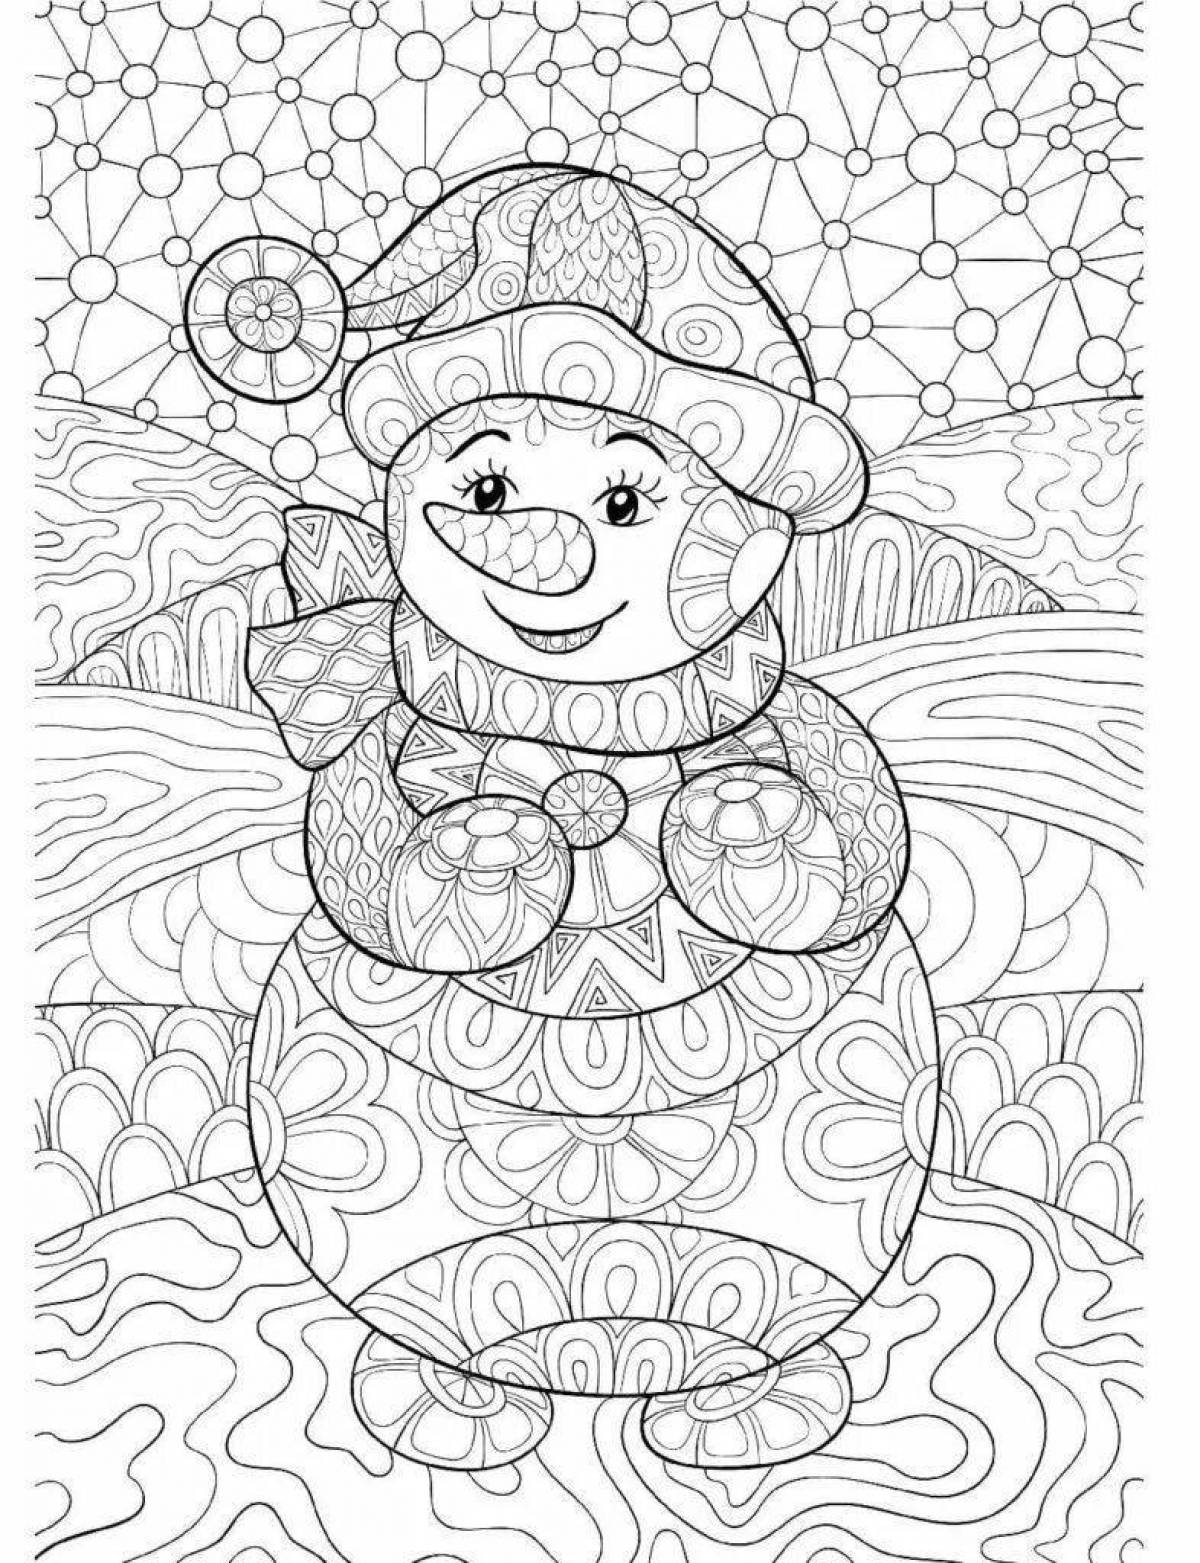 Royal christmas coloring book for adults